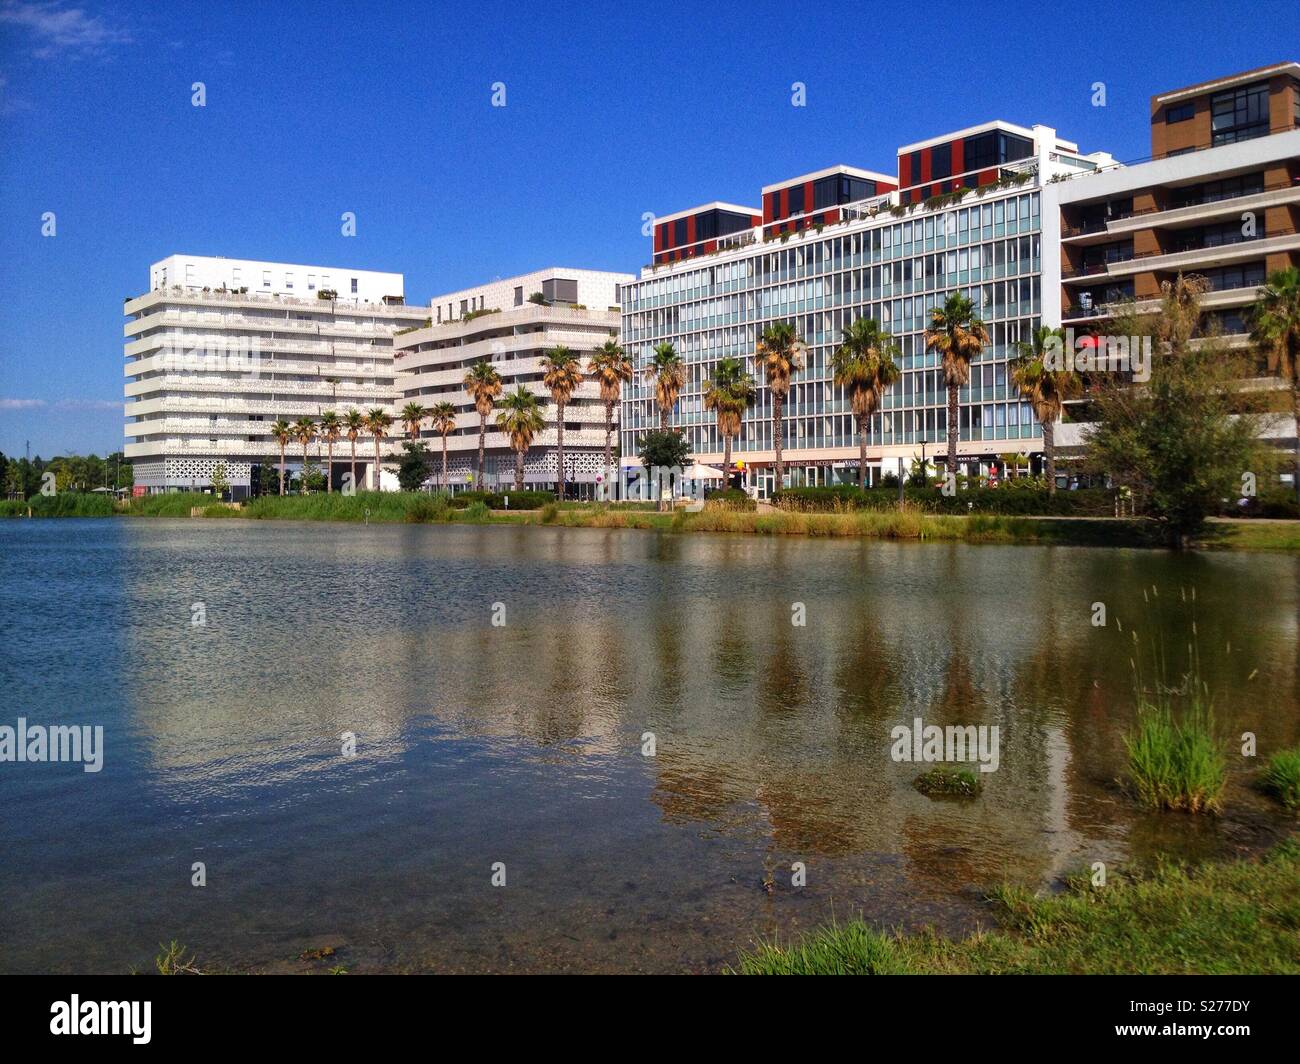 Immobilien in Port Marianne, Bassin Jacques Coeur, Montpellier Frankreich Stockfoto